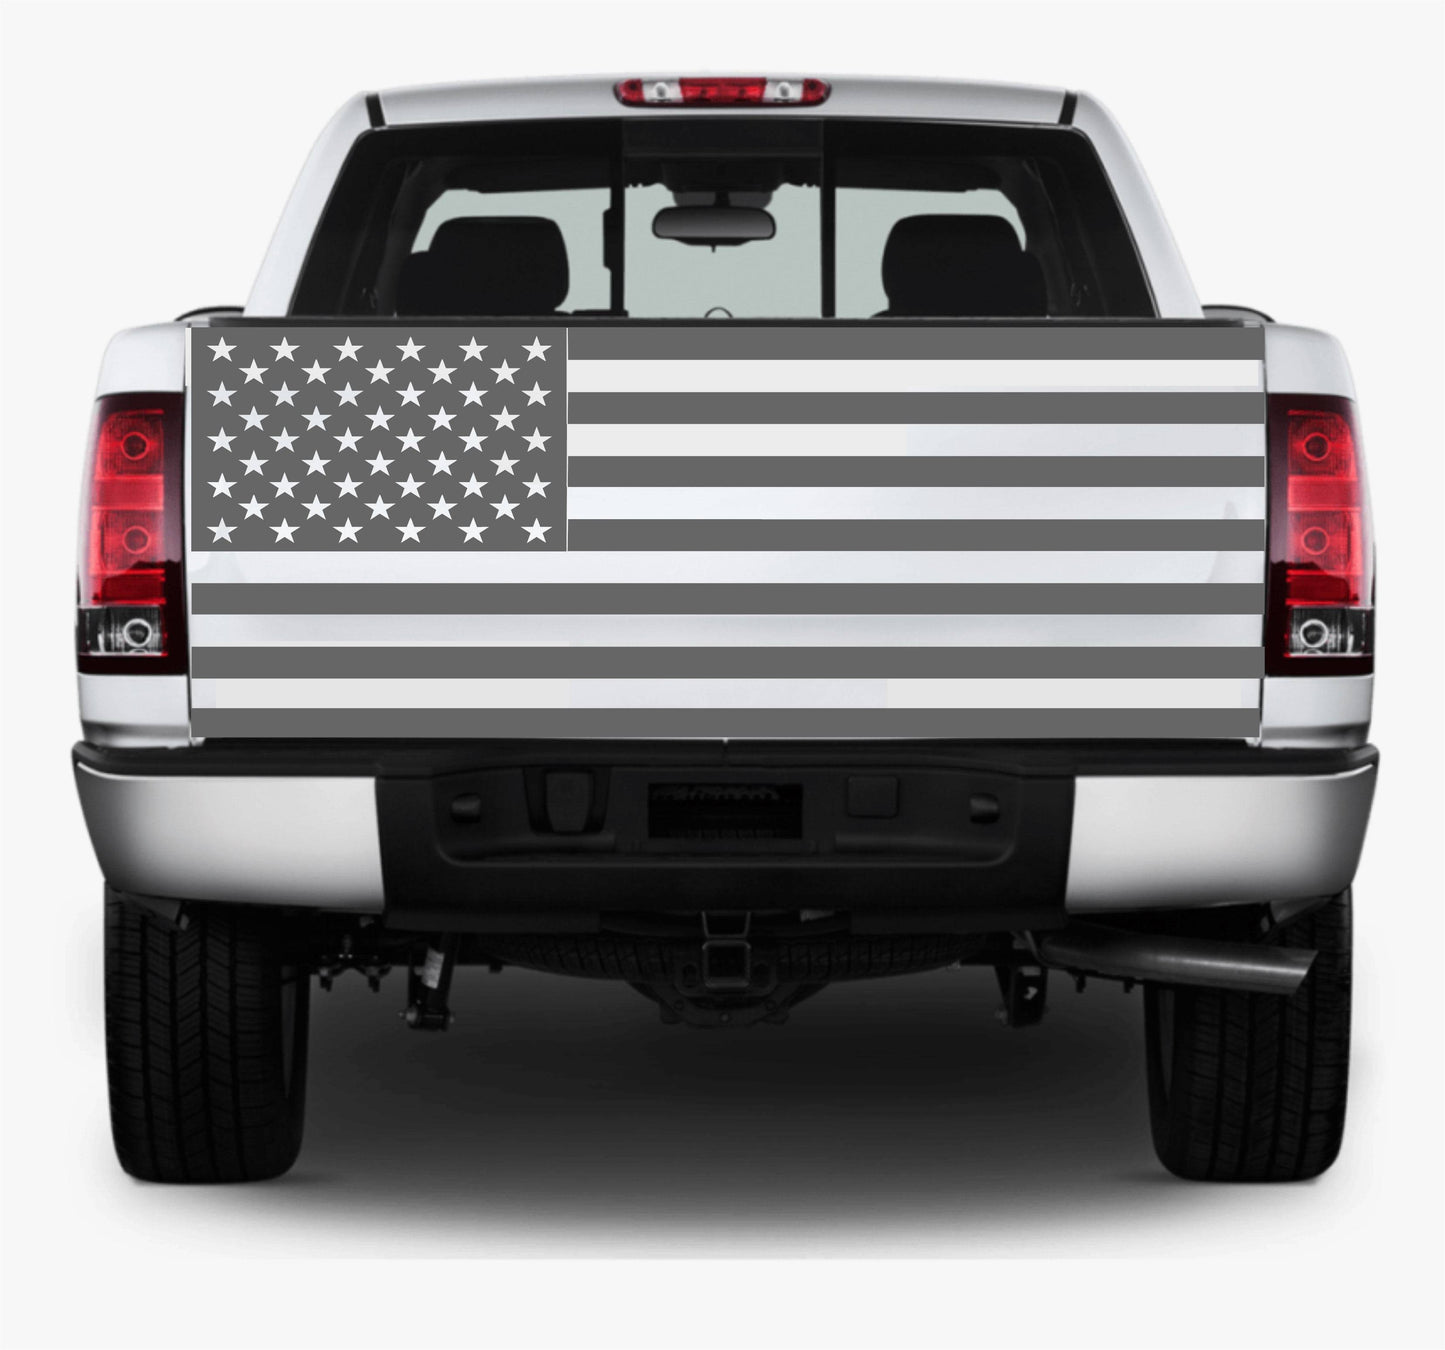 American Flag Decal Stickers | Patriotic Vinyl Decal for Any Trucks, SUV's, Vans, Tailgates, Bumpers...